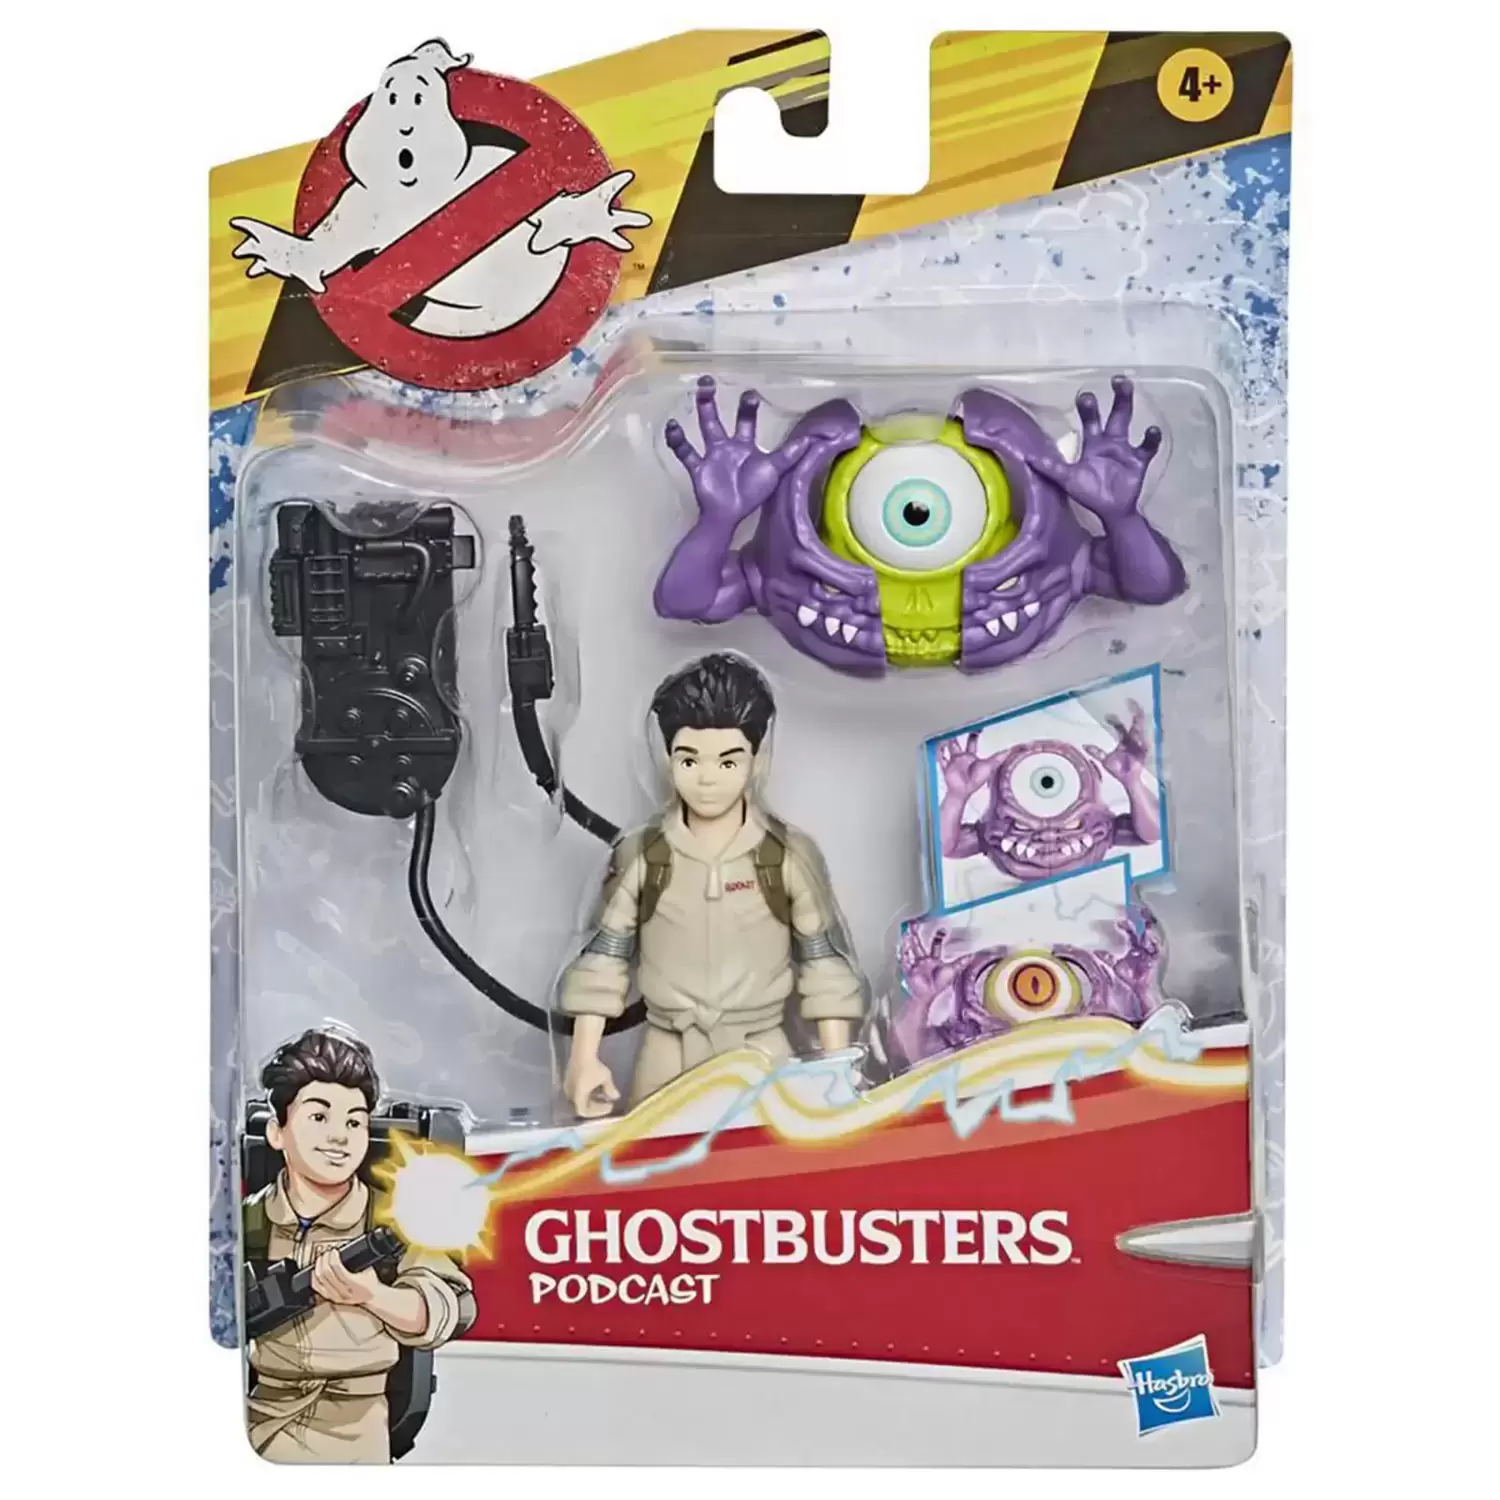 Ghostbusters Plasma Series - Podcast - Fright Feature